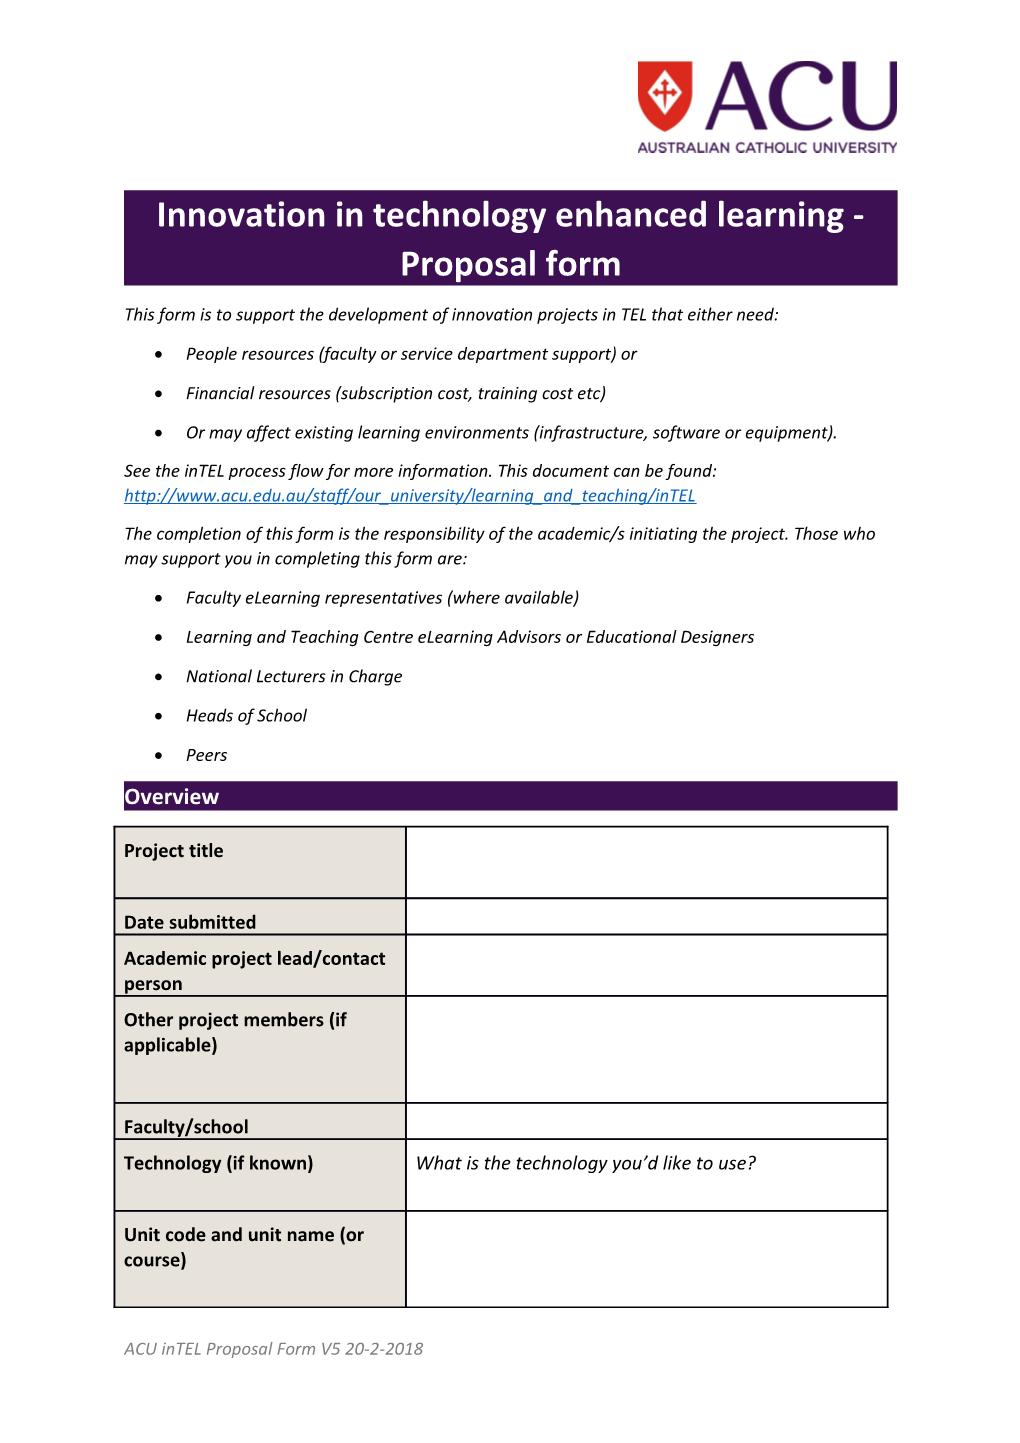 Innovation in Technology Enhanced Learning - Proposal Form